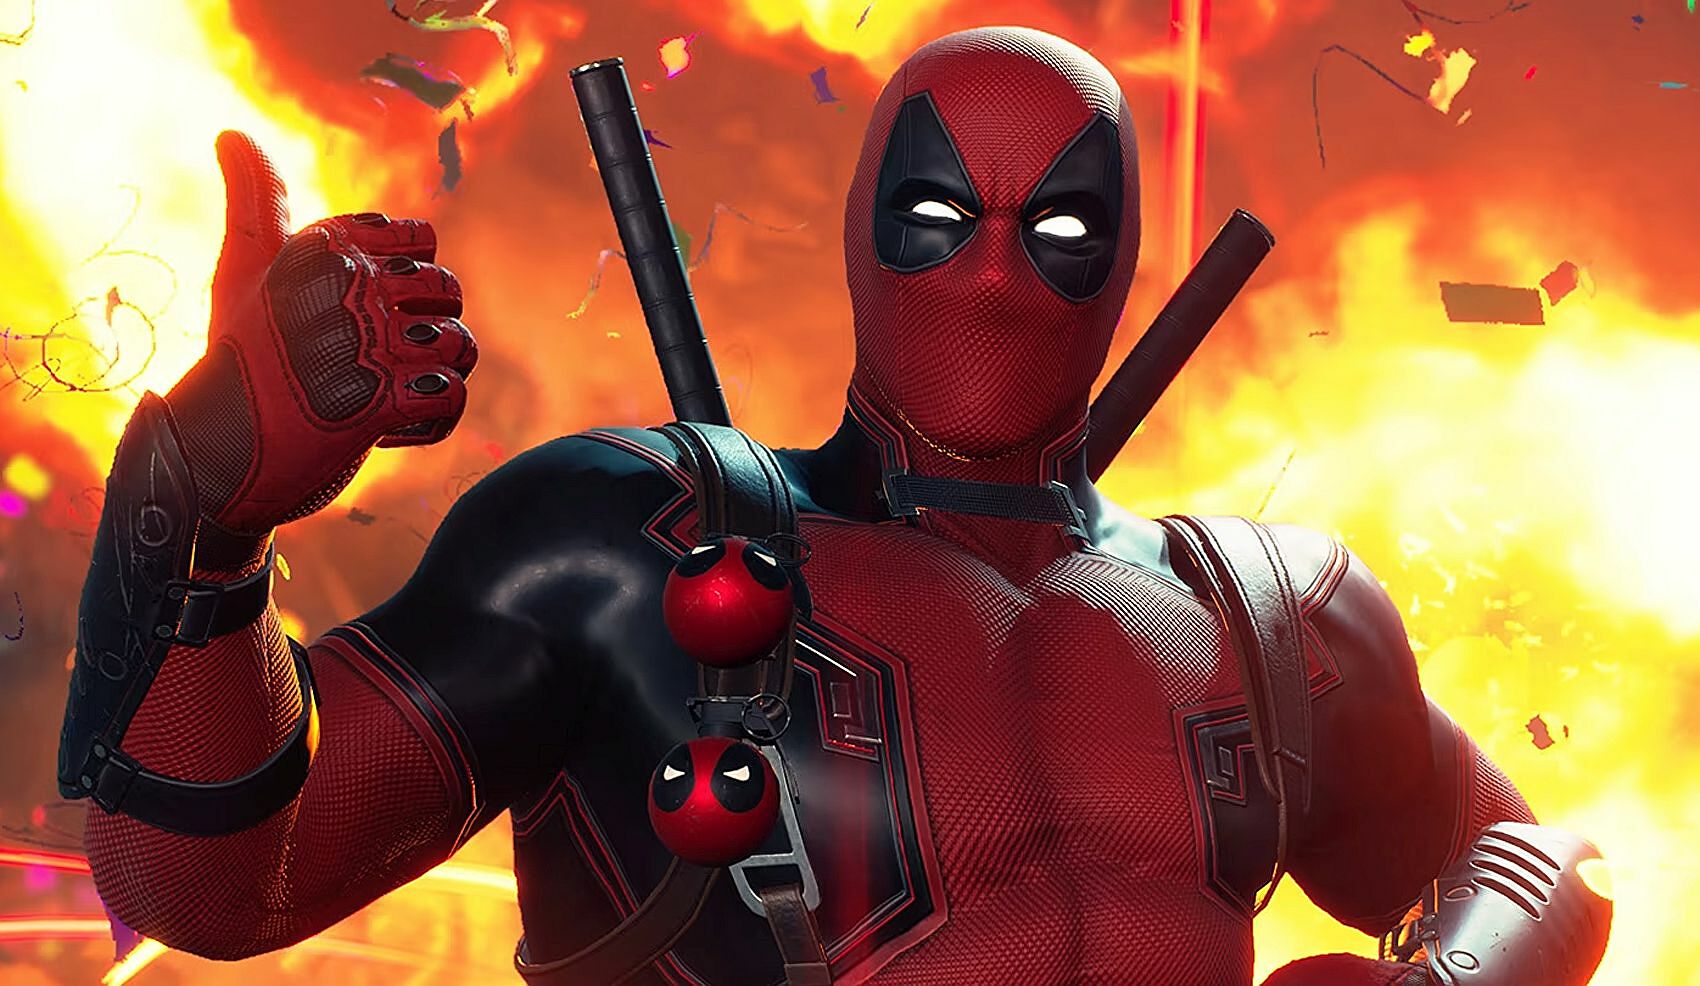 The first DLC for Marvel’s Midnight Suns stars Deadpool – check out the trailer